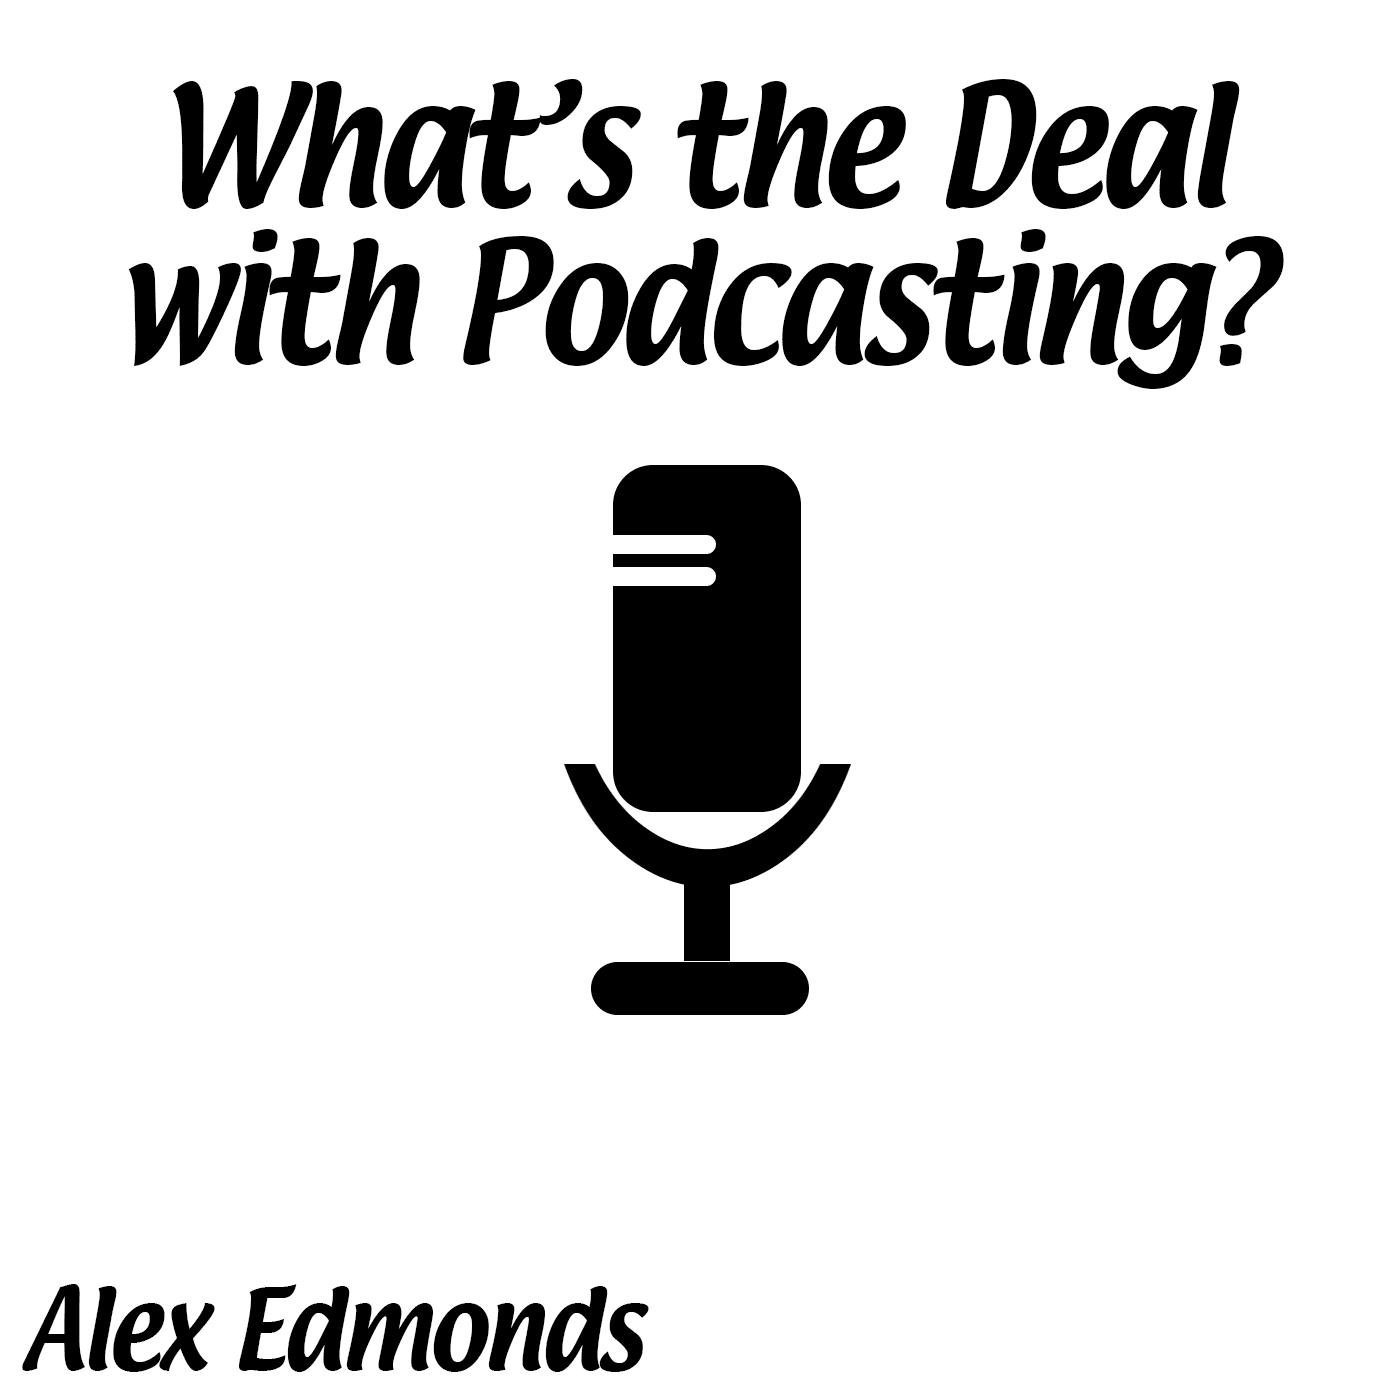 What's the Deal with Podcasting?